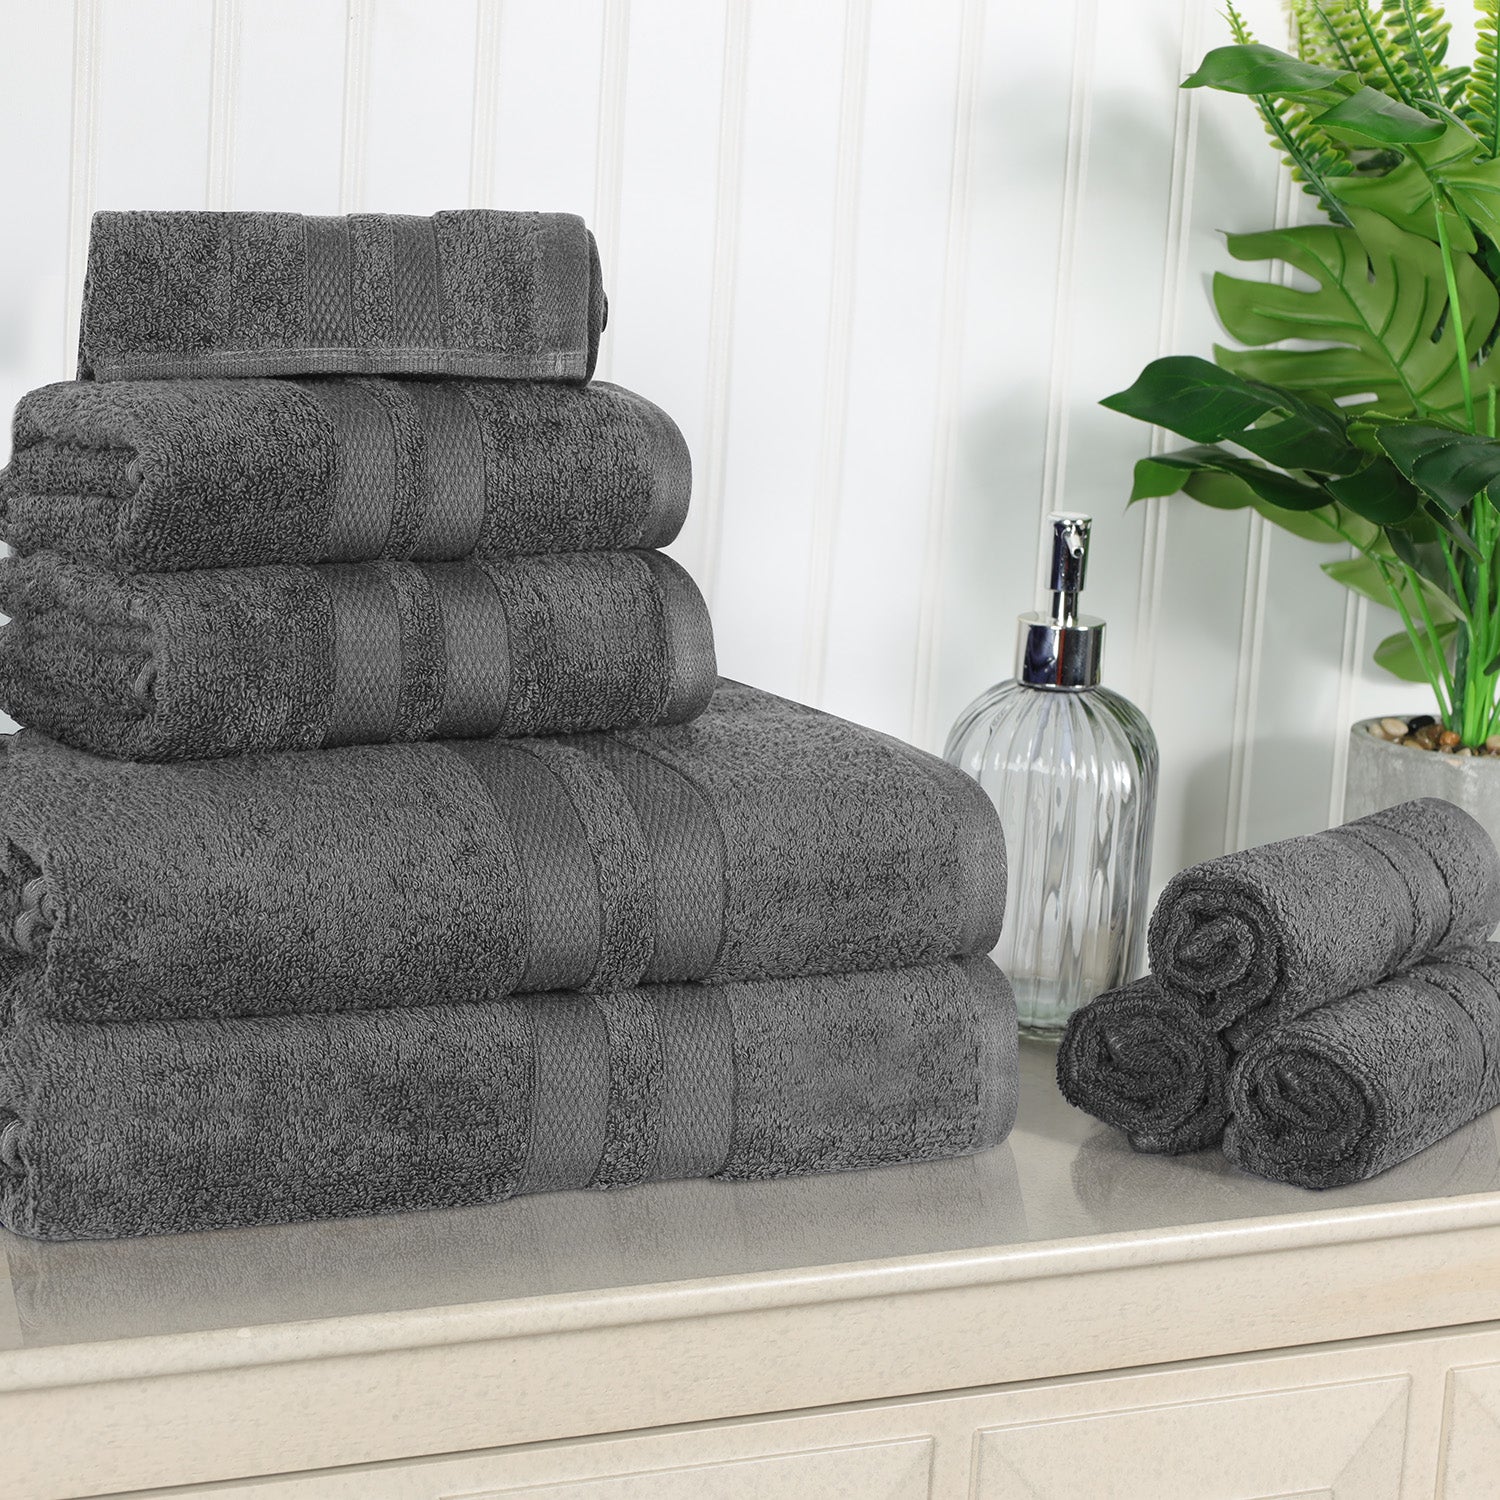 Superior Ultra Soft Cotton Absorbent Solid Assorted 8-Piece Towel Set - Charcoal